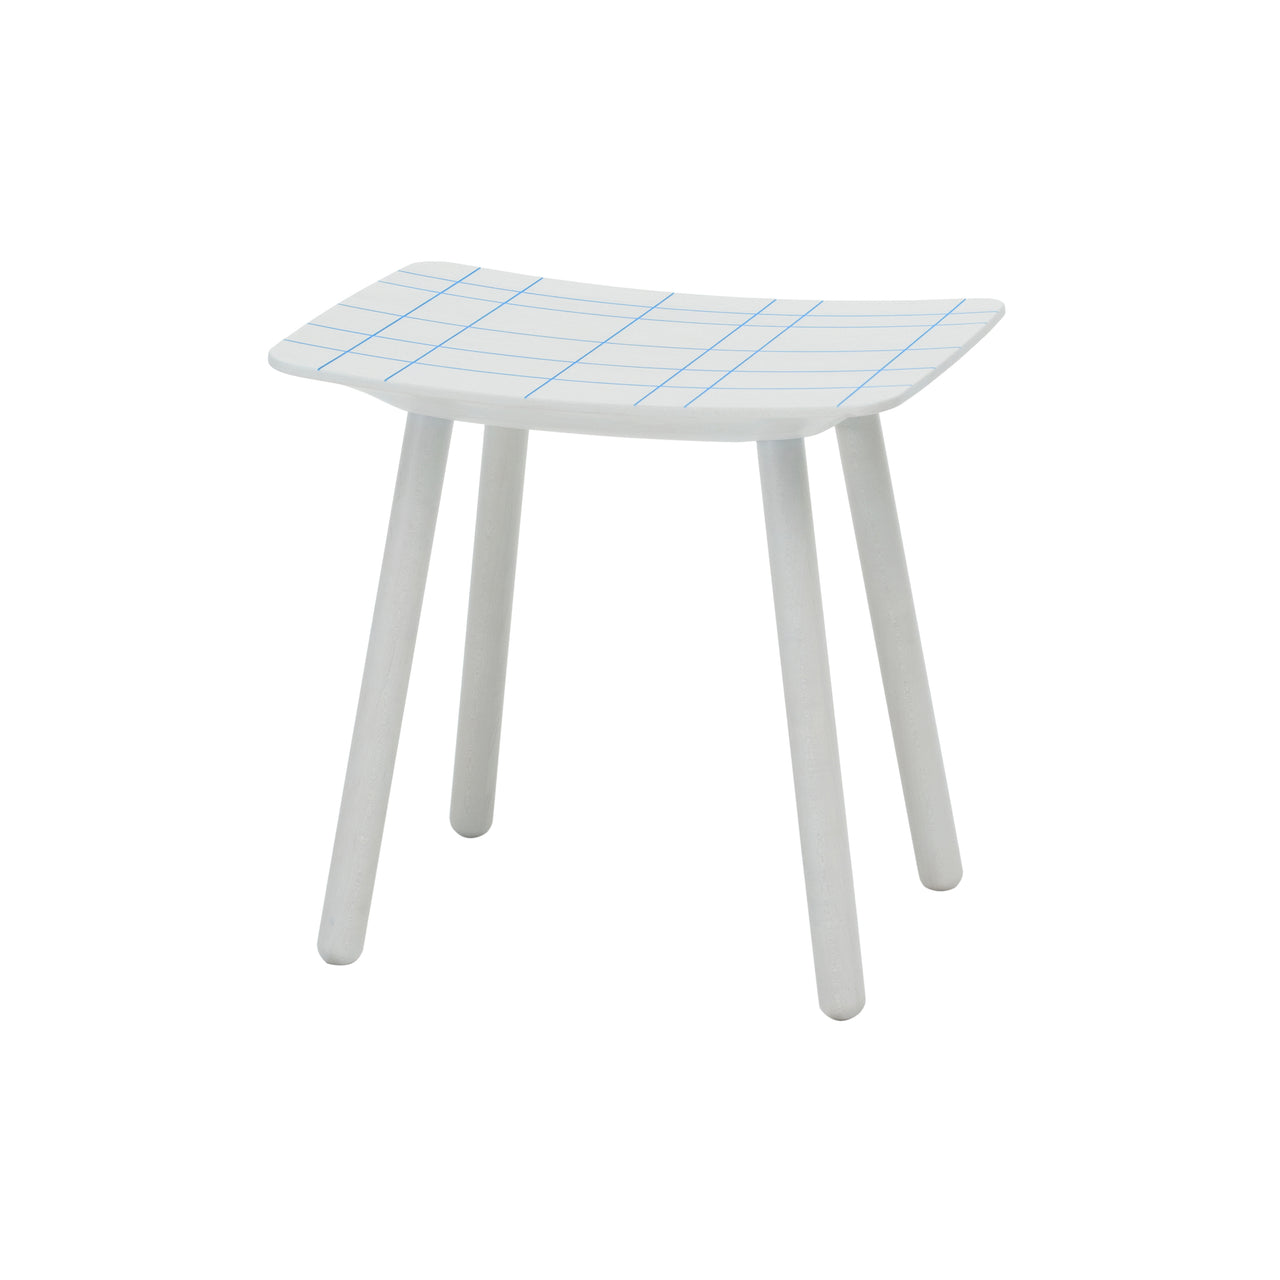 Colour Footstool: Cool White + Blue Grid